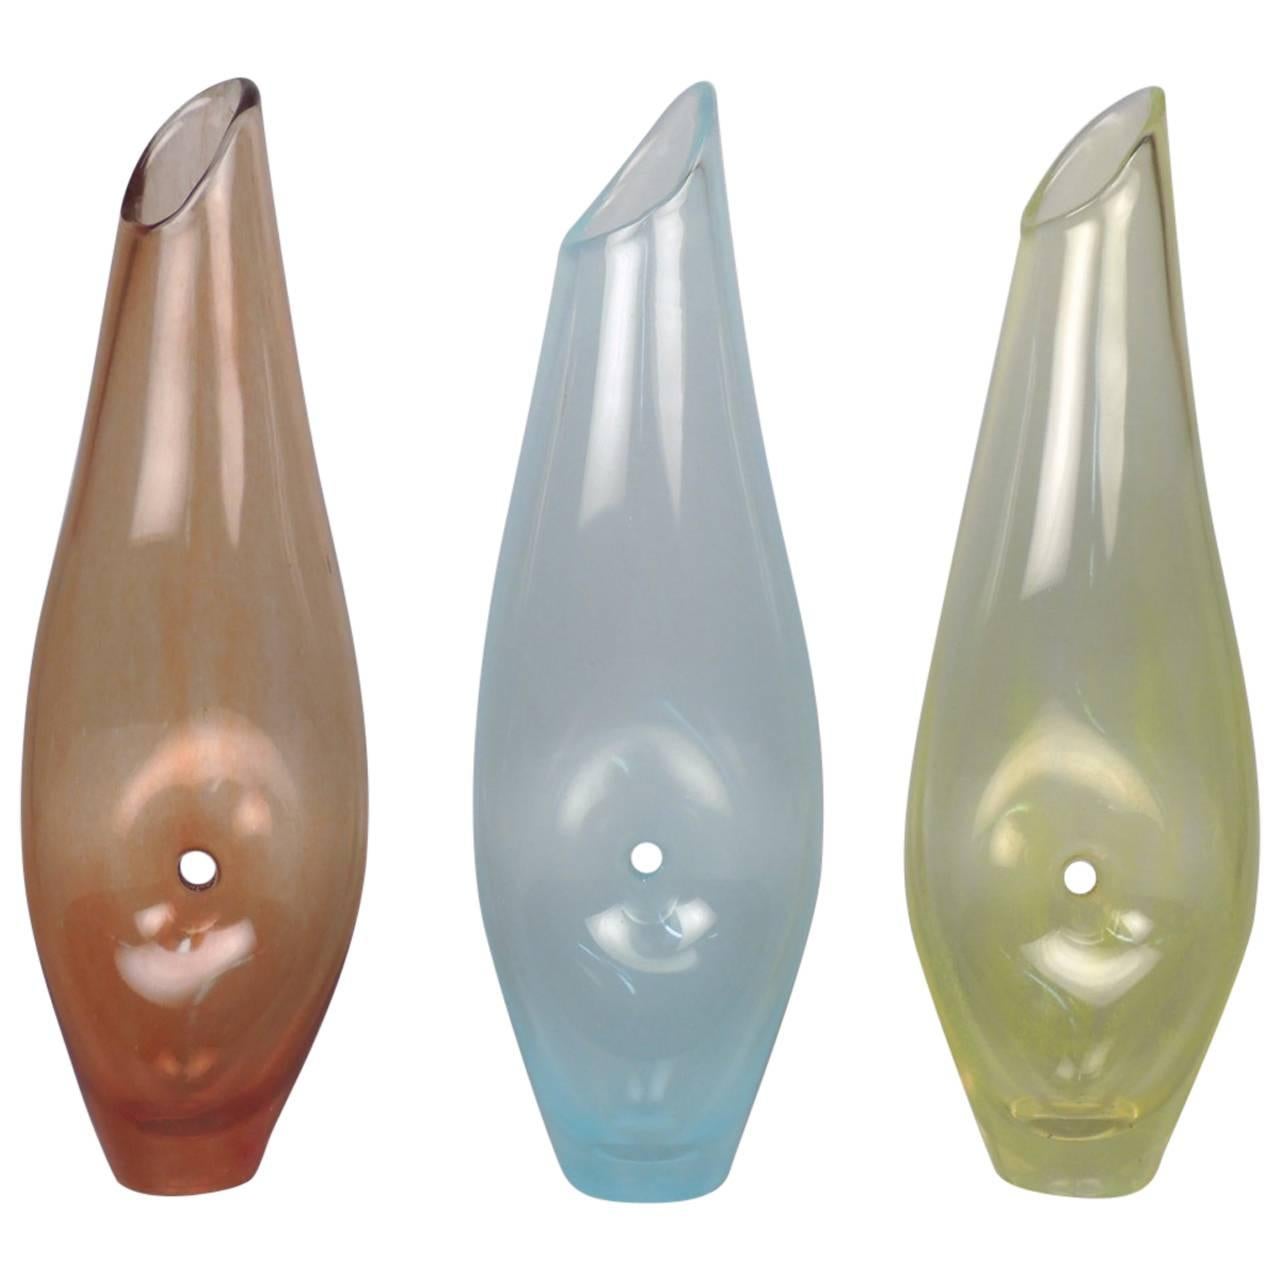 Three Modernist "Forato" Art Glass Vases by Jacqueline Terpins For Sale